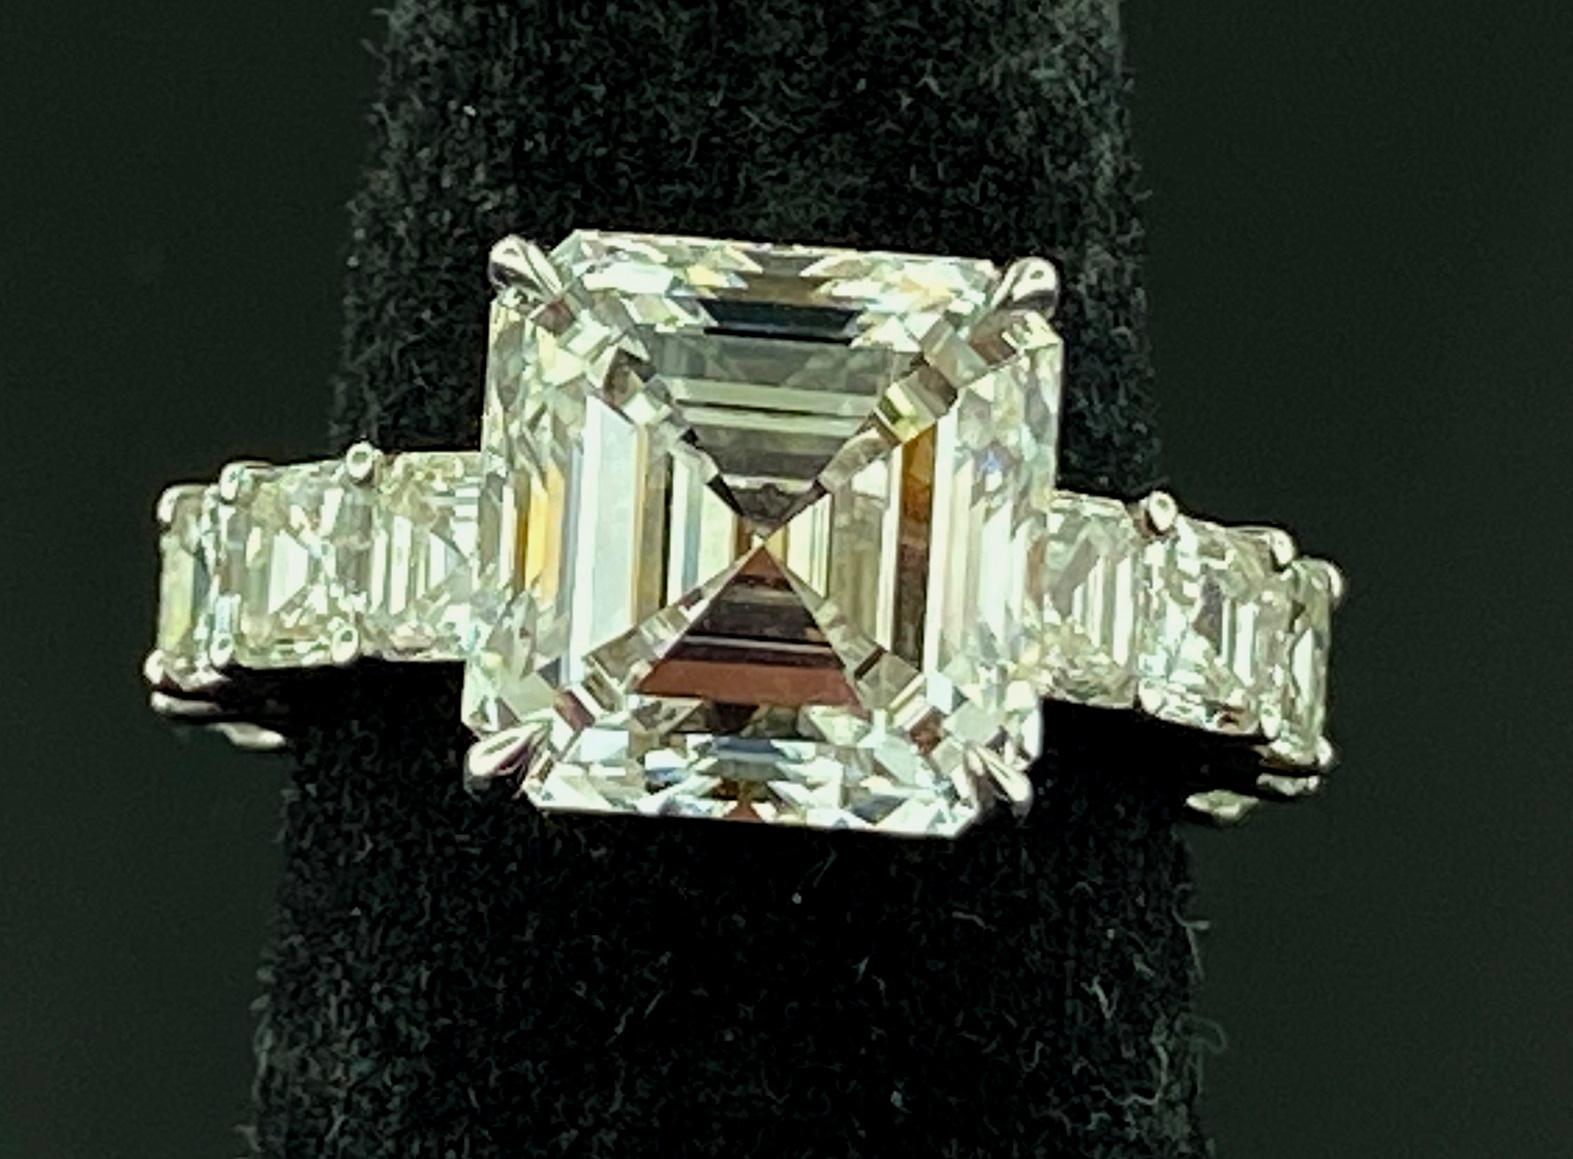 Set in 18 karat white gold is a GIA Certified 6.23 carat Asscher cut Diamond.  Color is H, Clarity is VS-1.  The band has 16 Asscher cut stones with a total weight of 4.19 carats.  Ring size is 6.